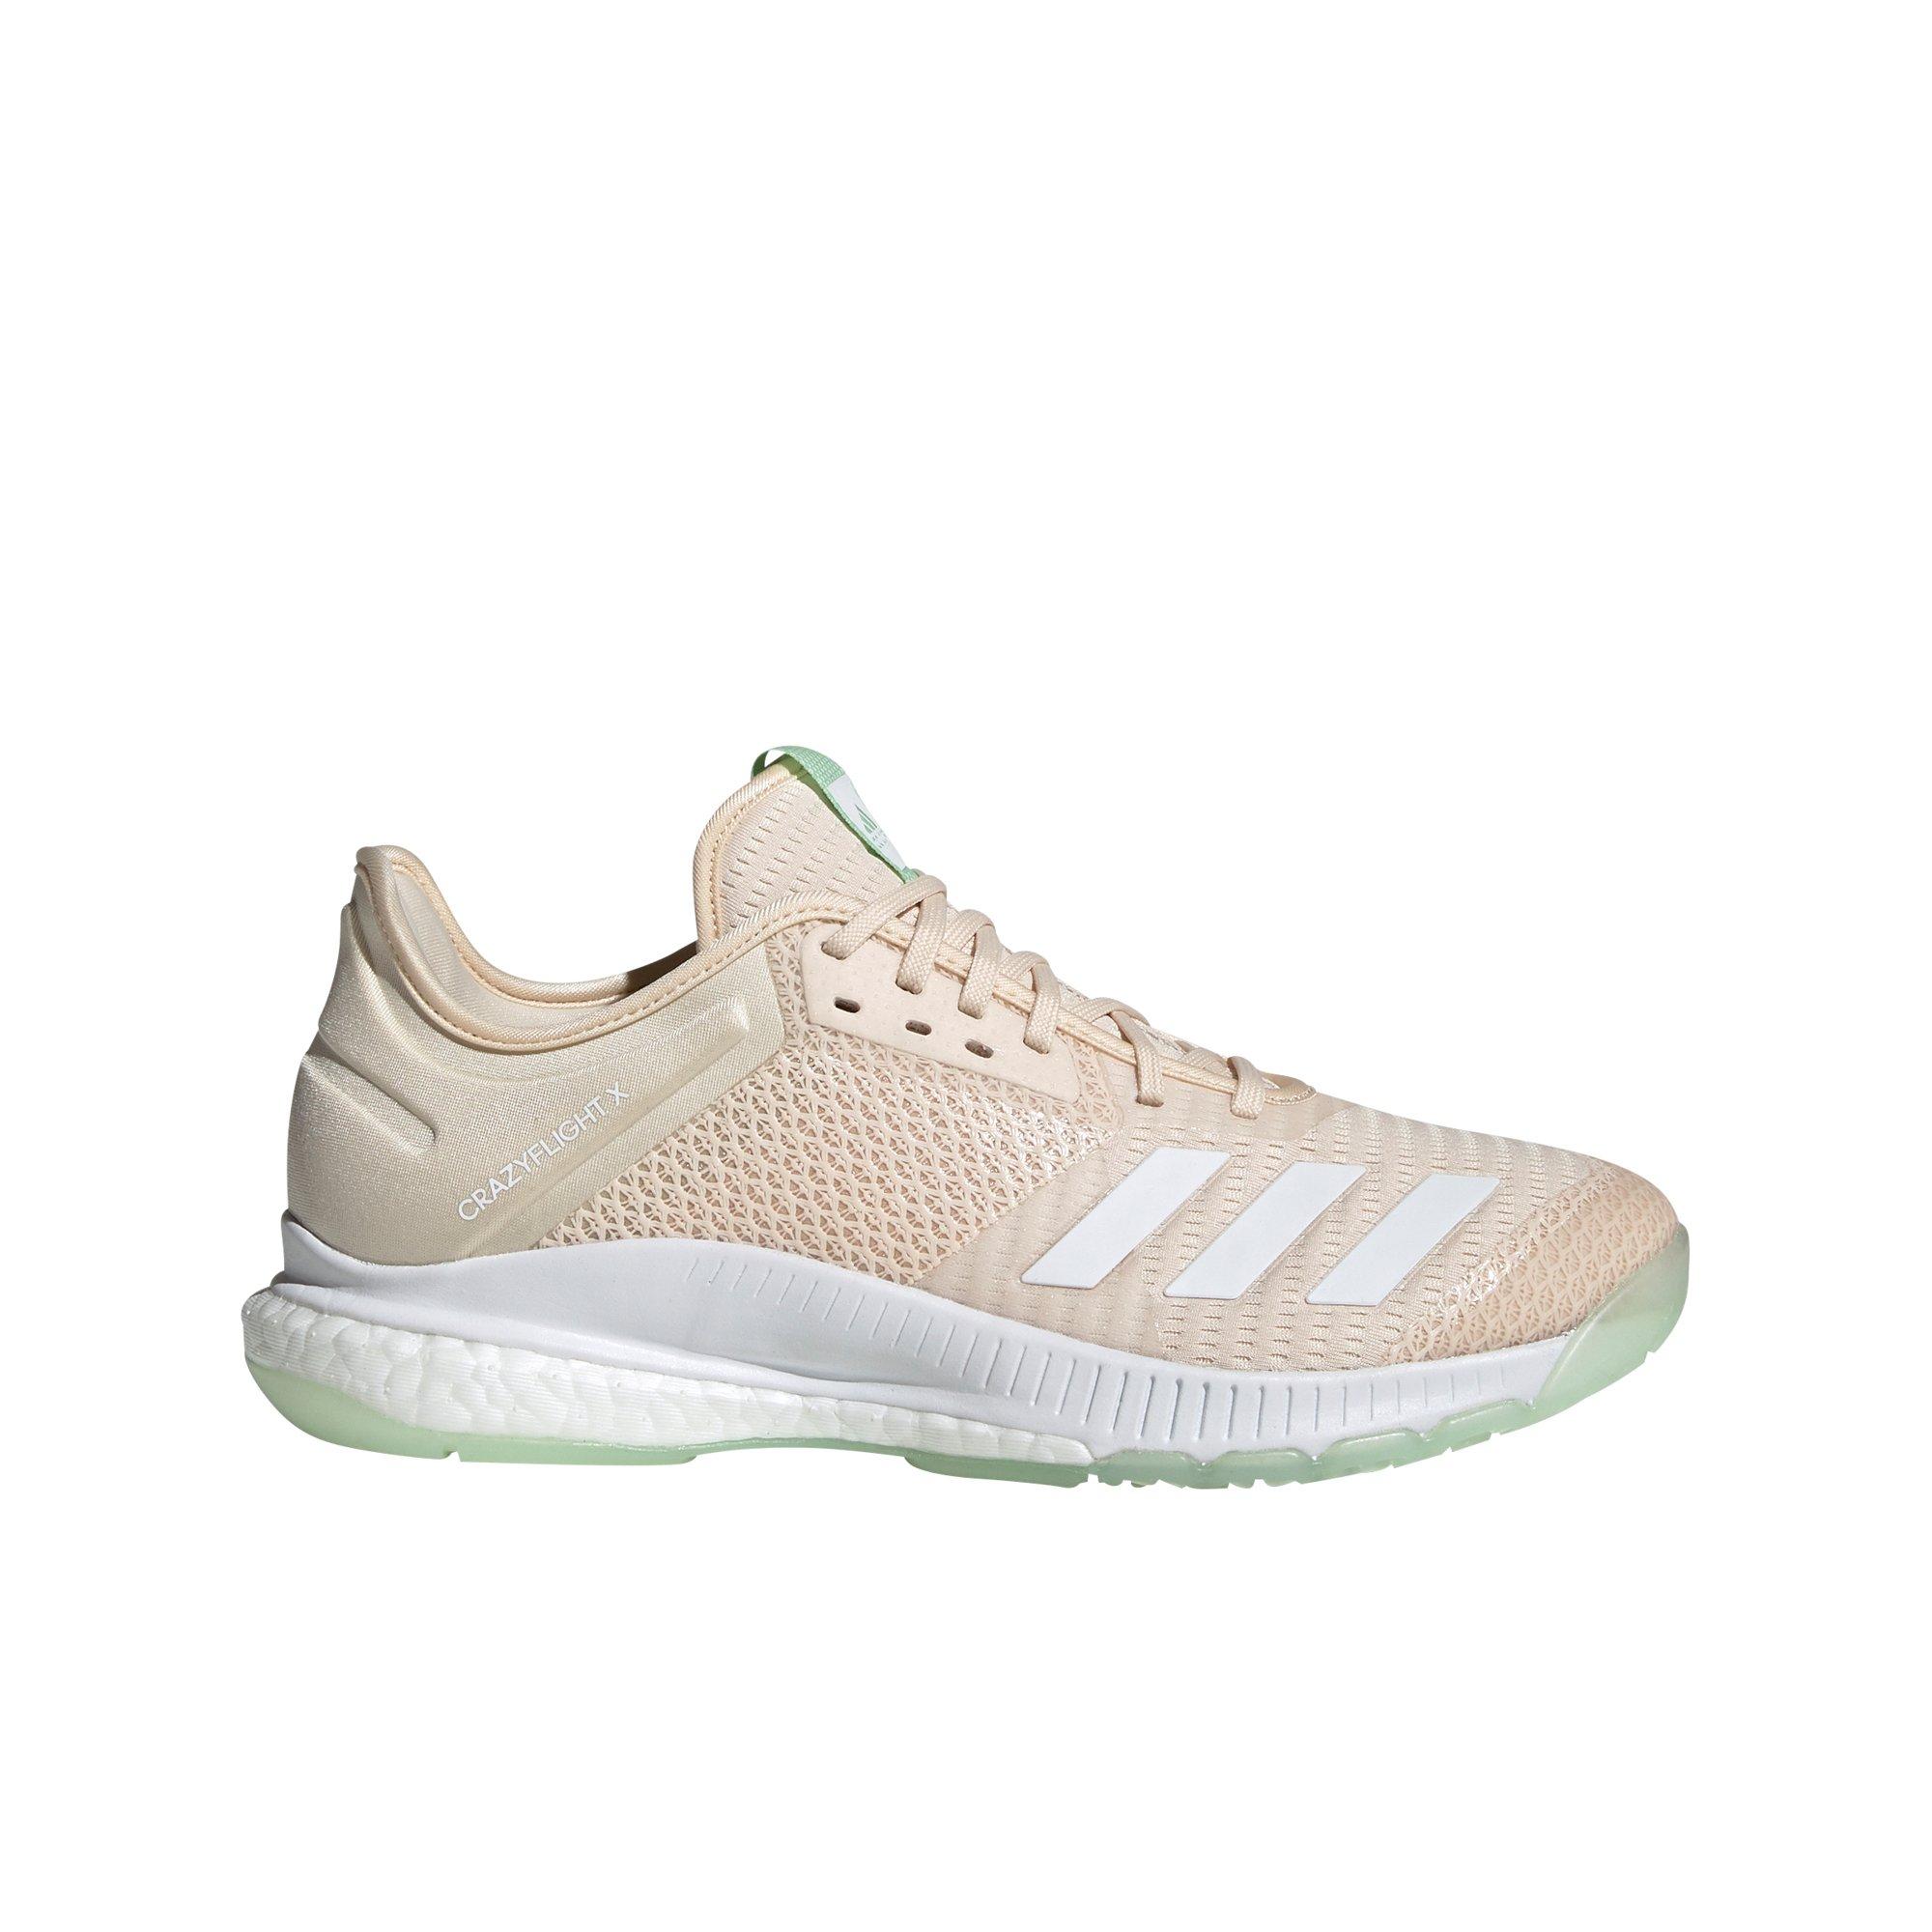 adidas volleyball shoes white